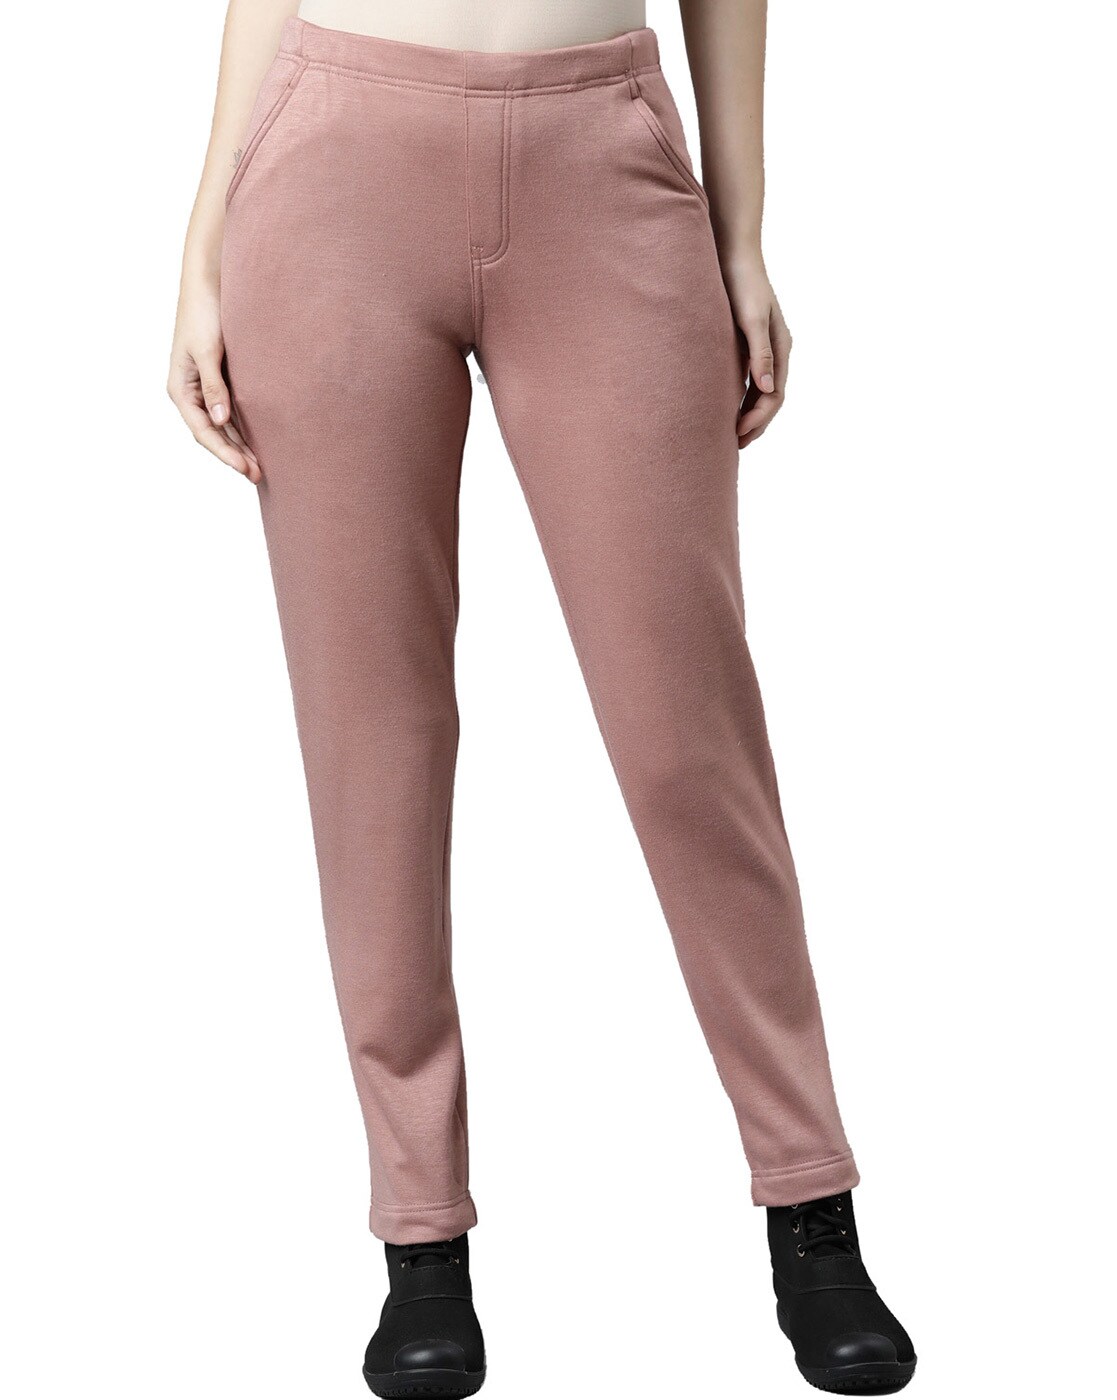 United Colors Of Benetton Trousers and Pants  Buy United Colors Of  Benetton Women Solid Loose Fit Trousers Black Online  Nykaa Fashion